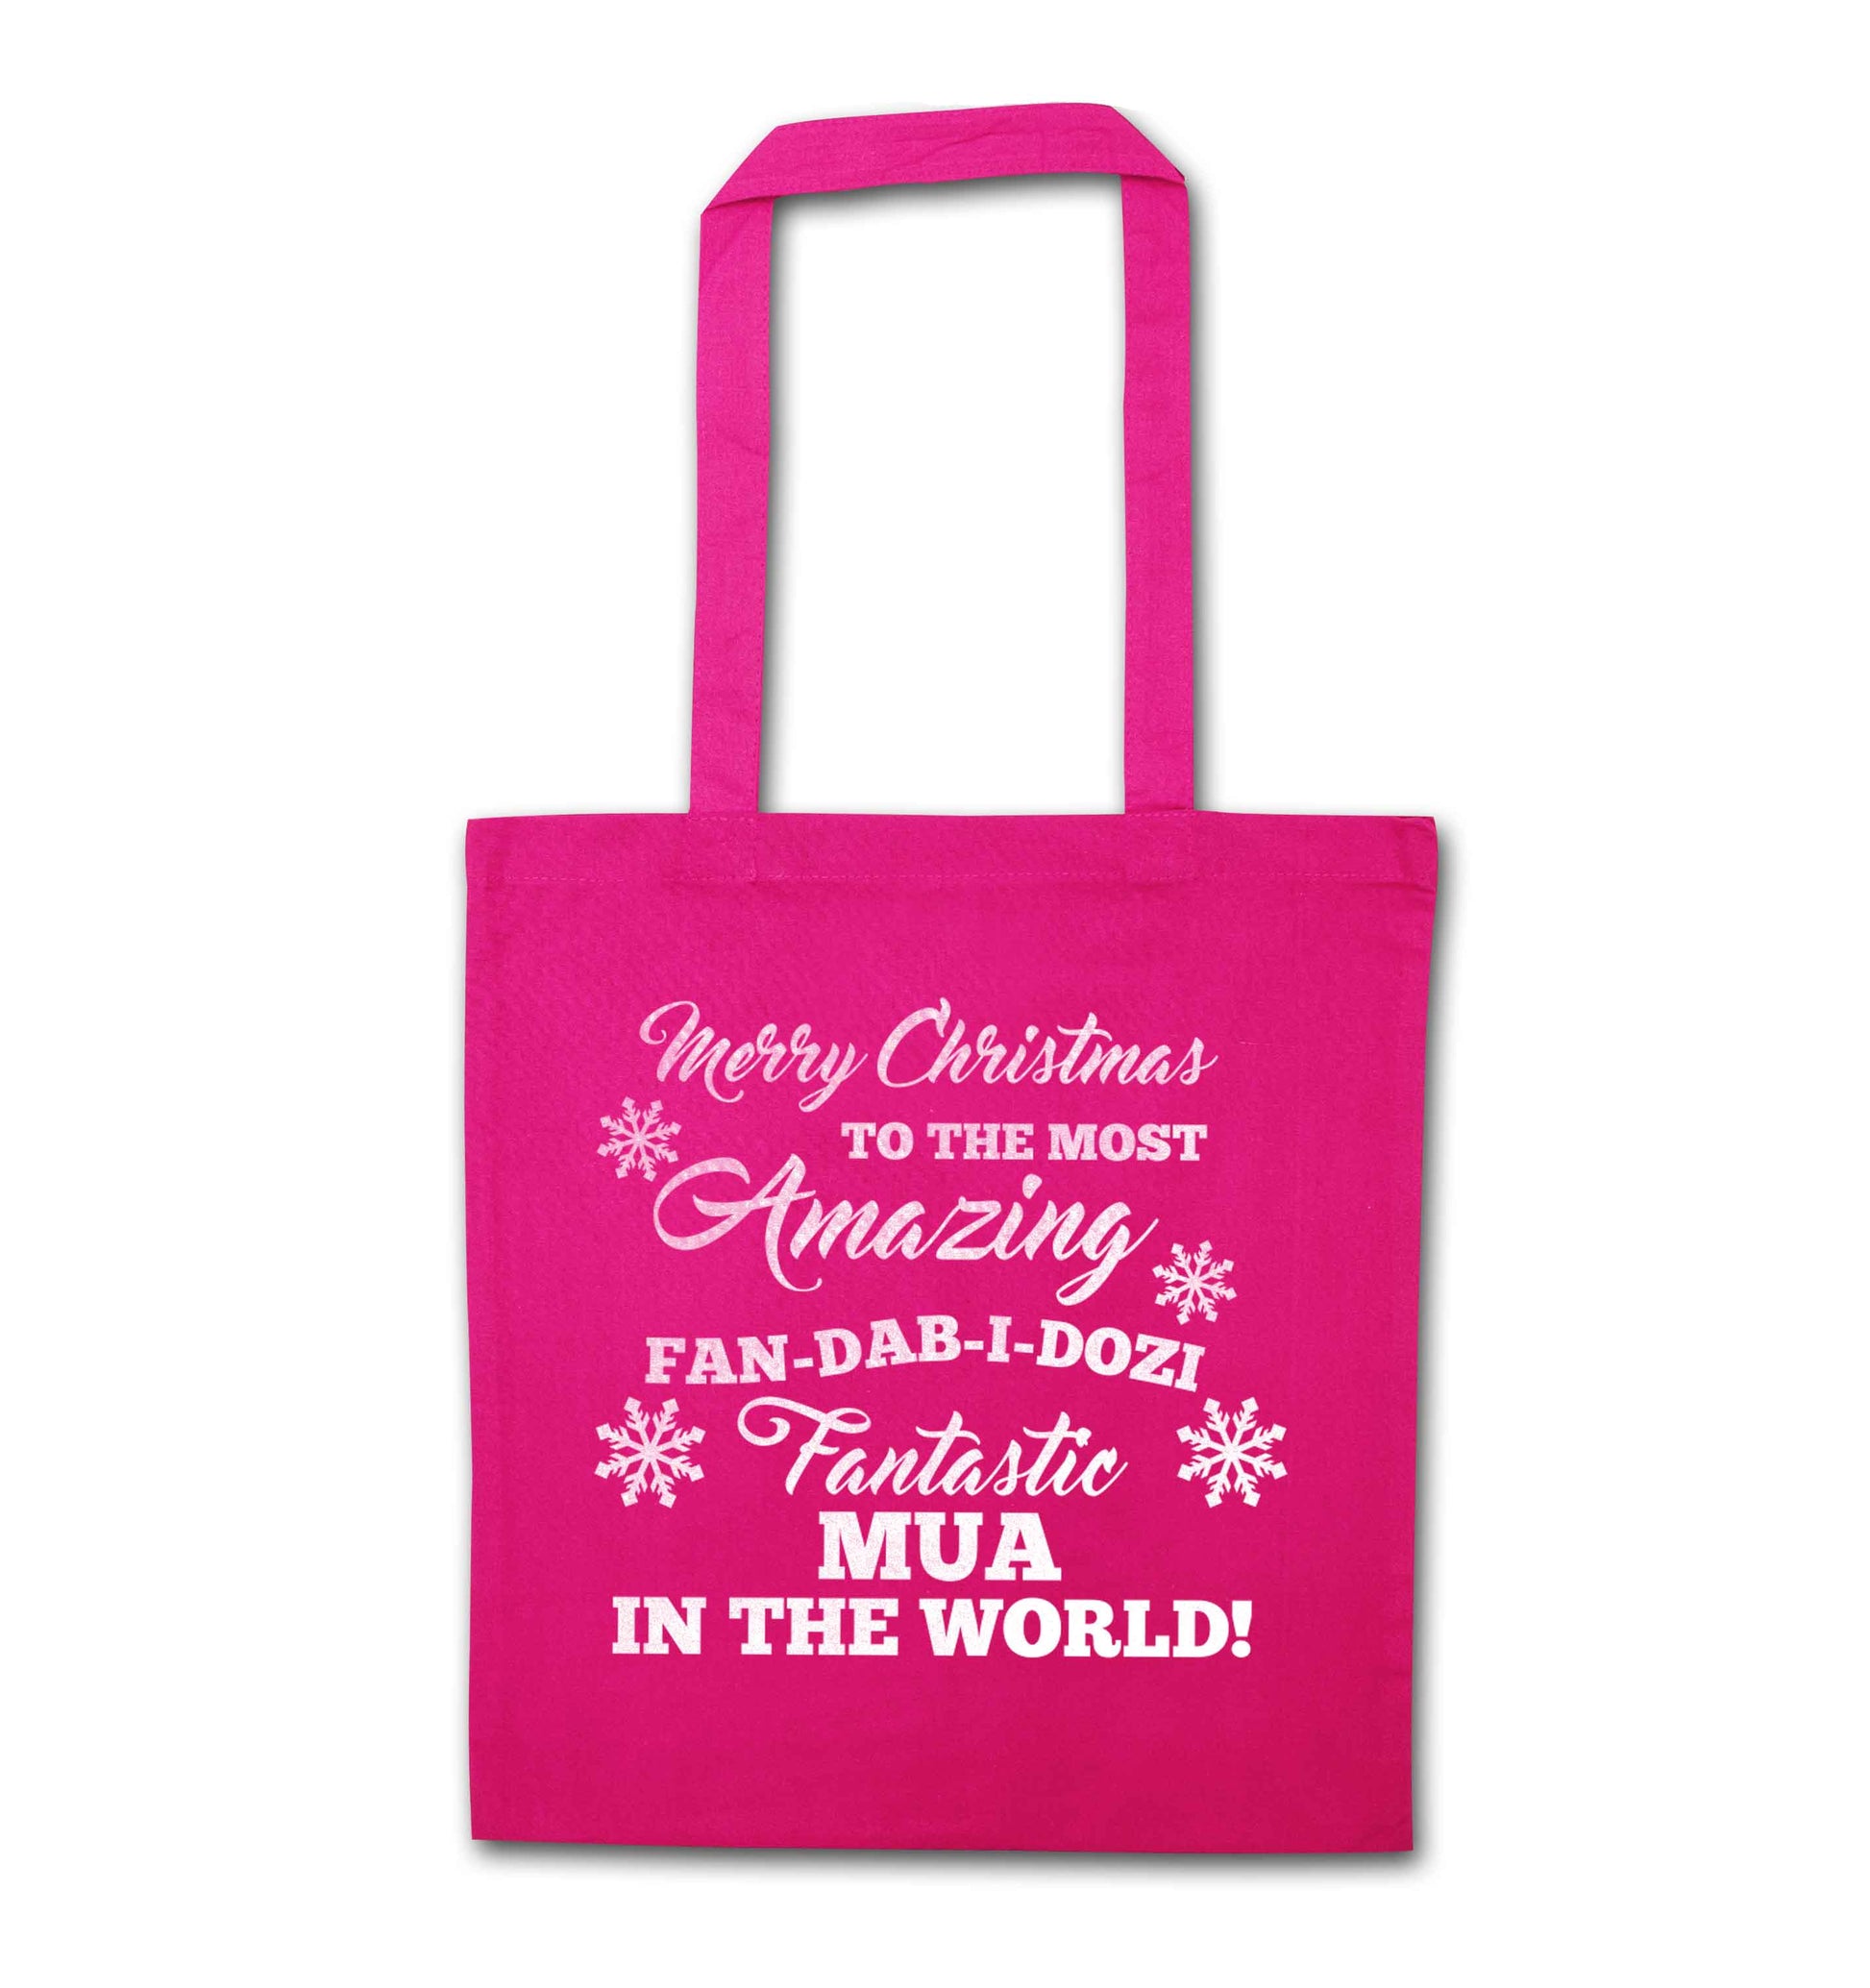 Merry Christmas to the most amazing fan-dab-i-dozi fantasic MUA in the world pink tote bag